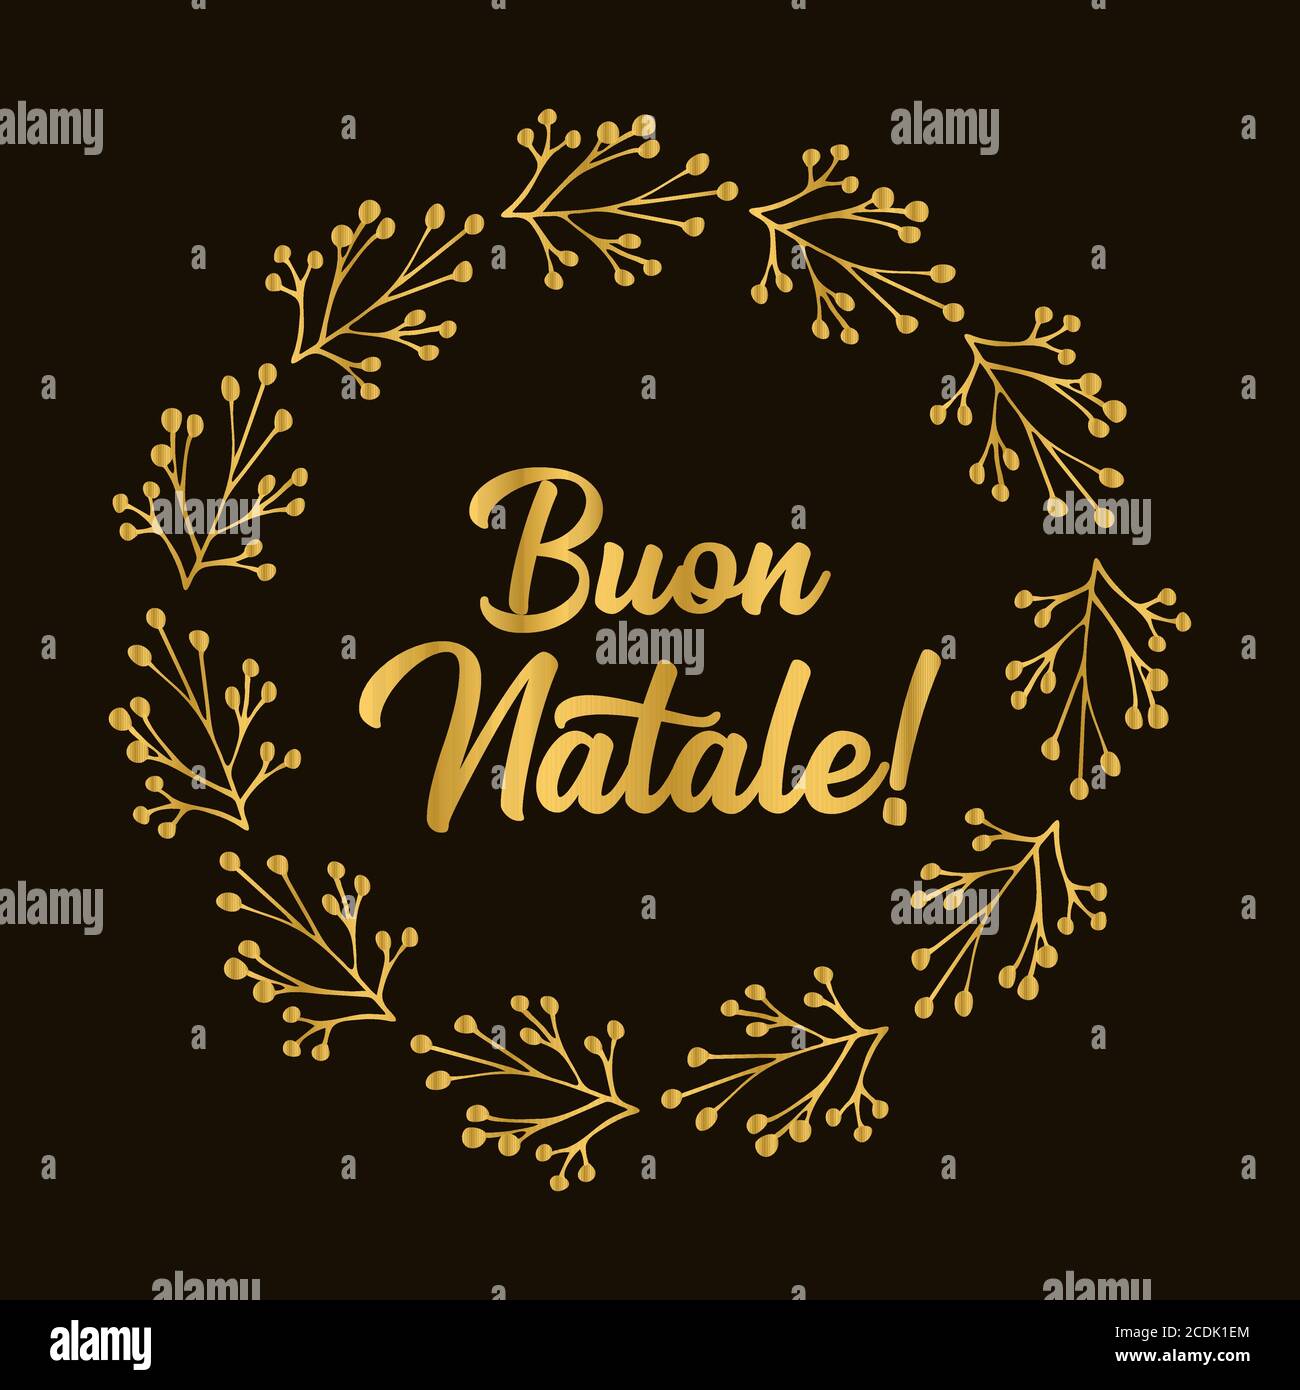 Buon Natale Messages.Christmas Card With Italian Message High Resolution Stock Photography And Images Alamy